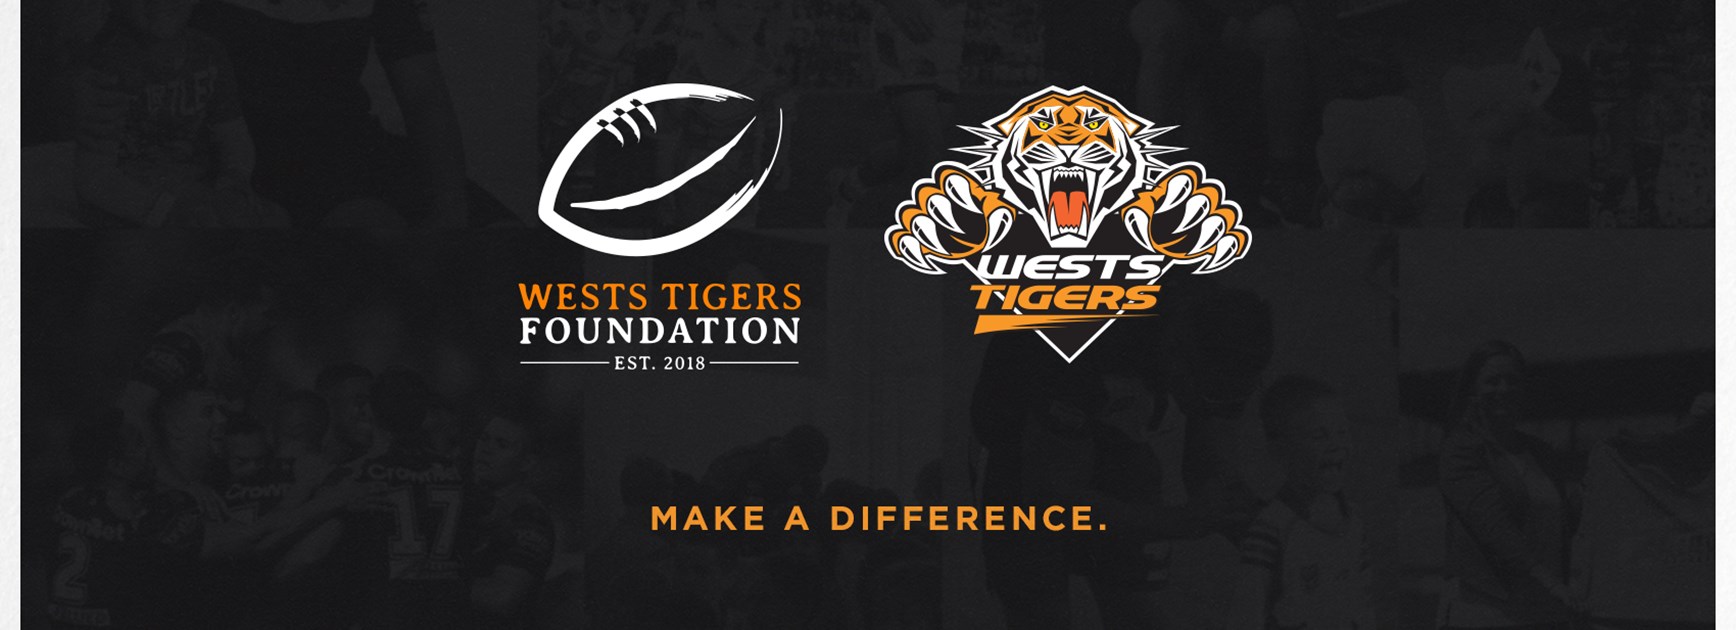 Wests Tigers Foundation Community Update: June 2021